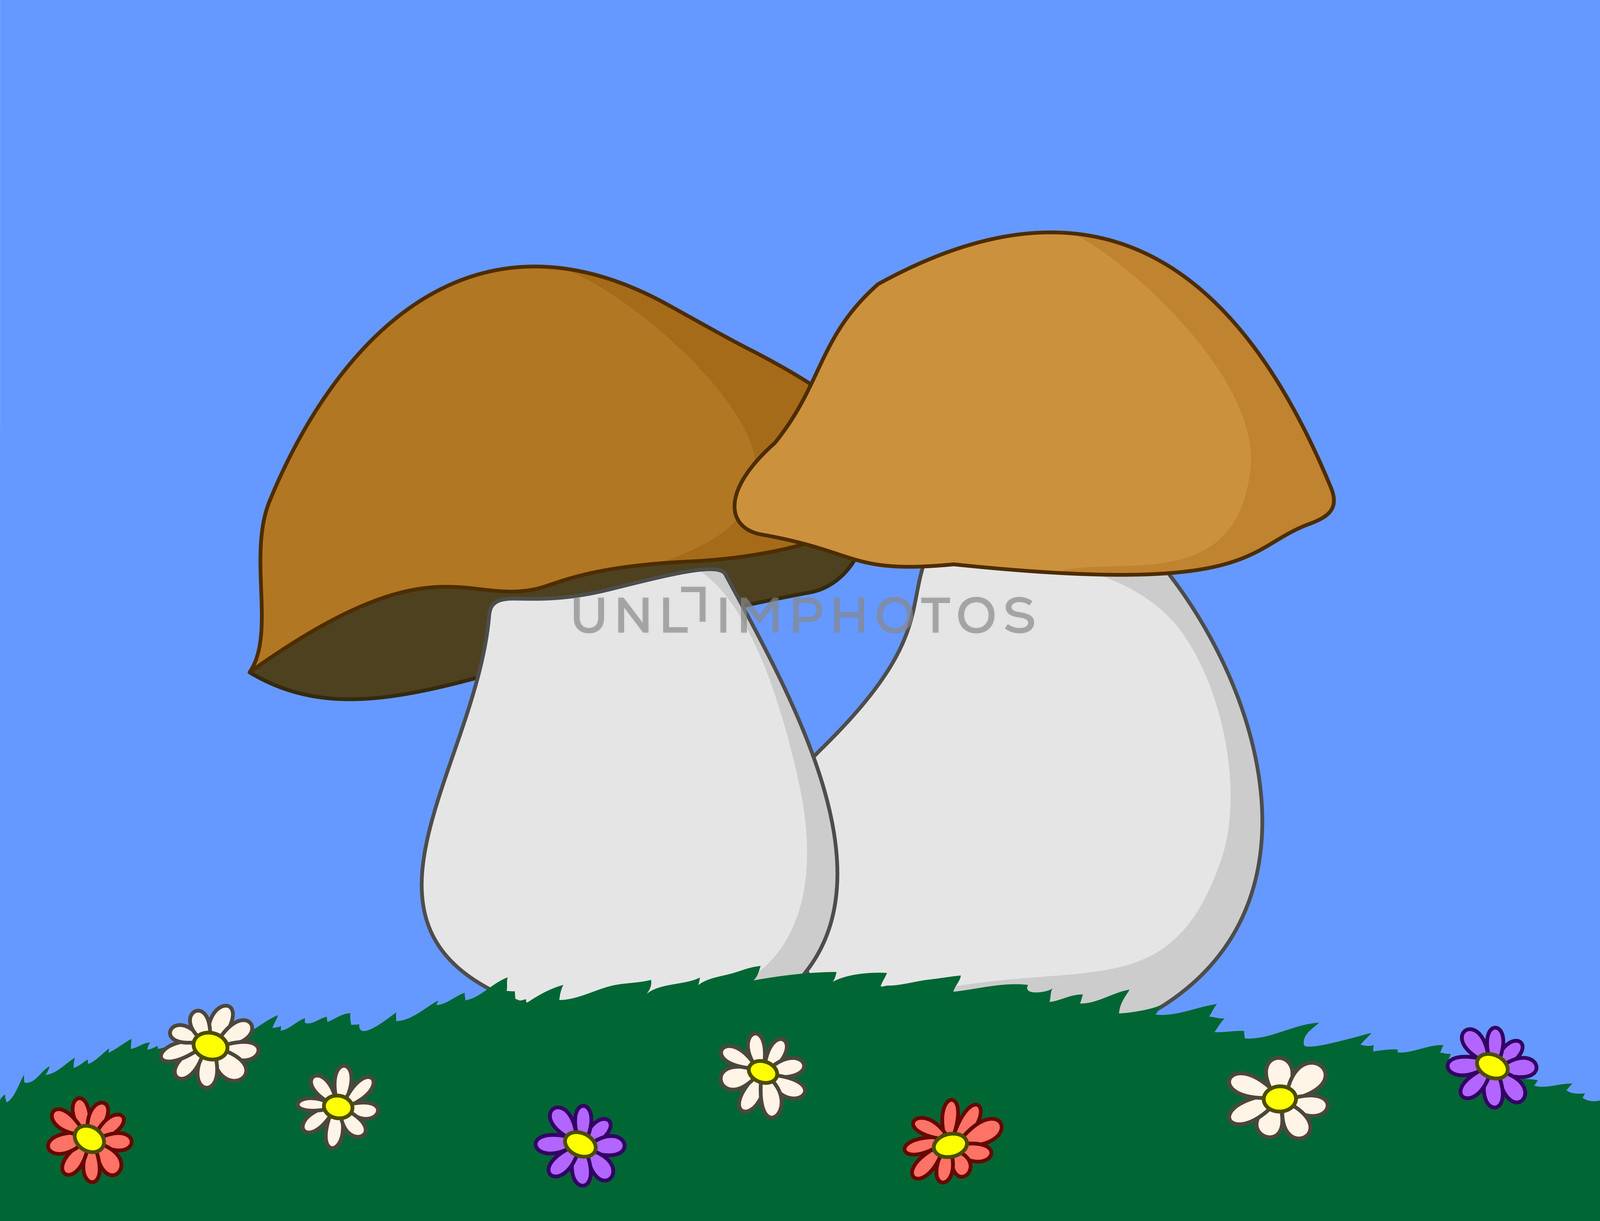 Cartoon, mushrooms in a green grass with multi-coloured flowers.